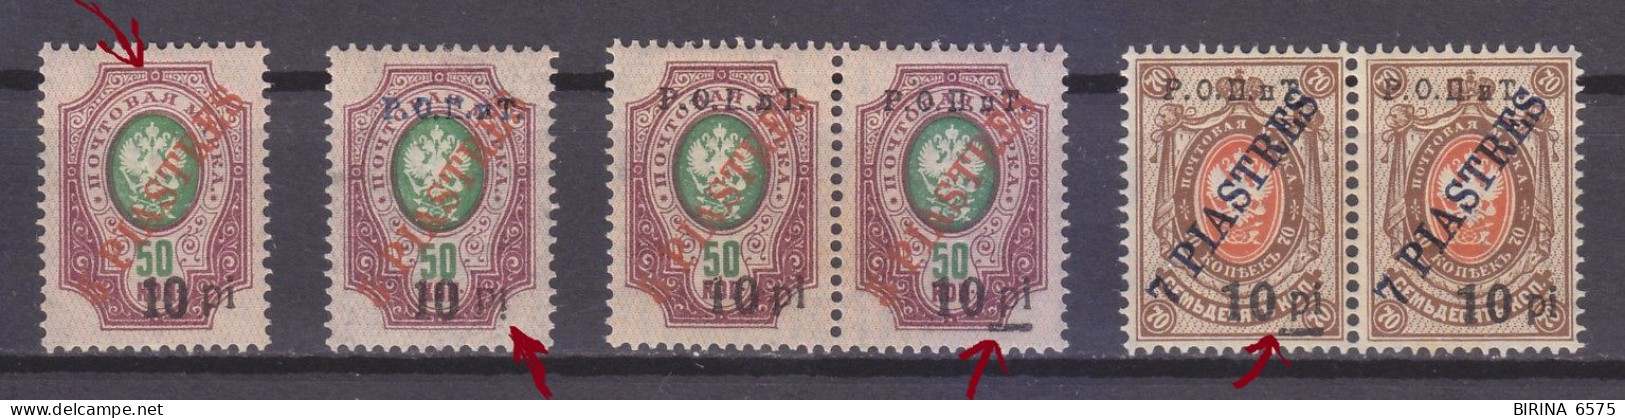 Russian PO In Levant. ROPIT. Varieties Of Surcharge - Inverted "i", Bar Under "pi", Without "РОПИТ" - M - Turkish Empire